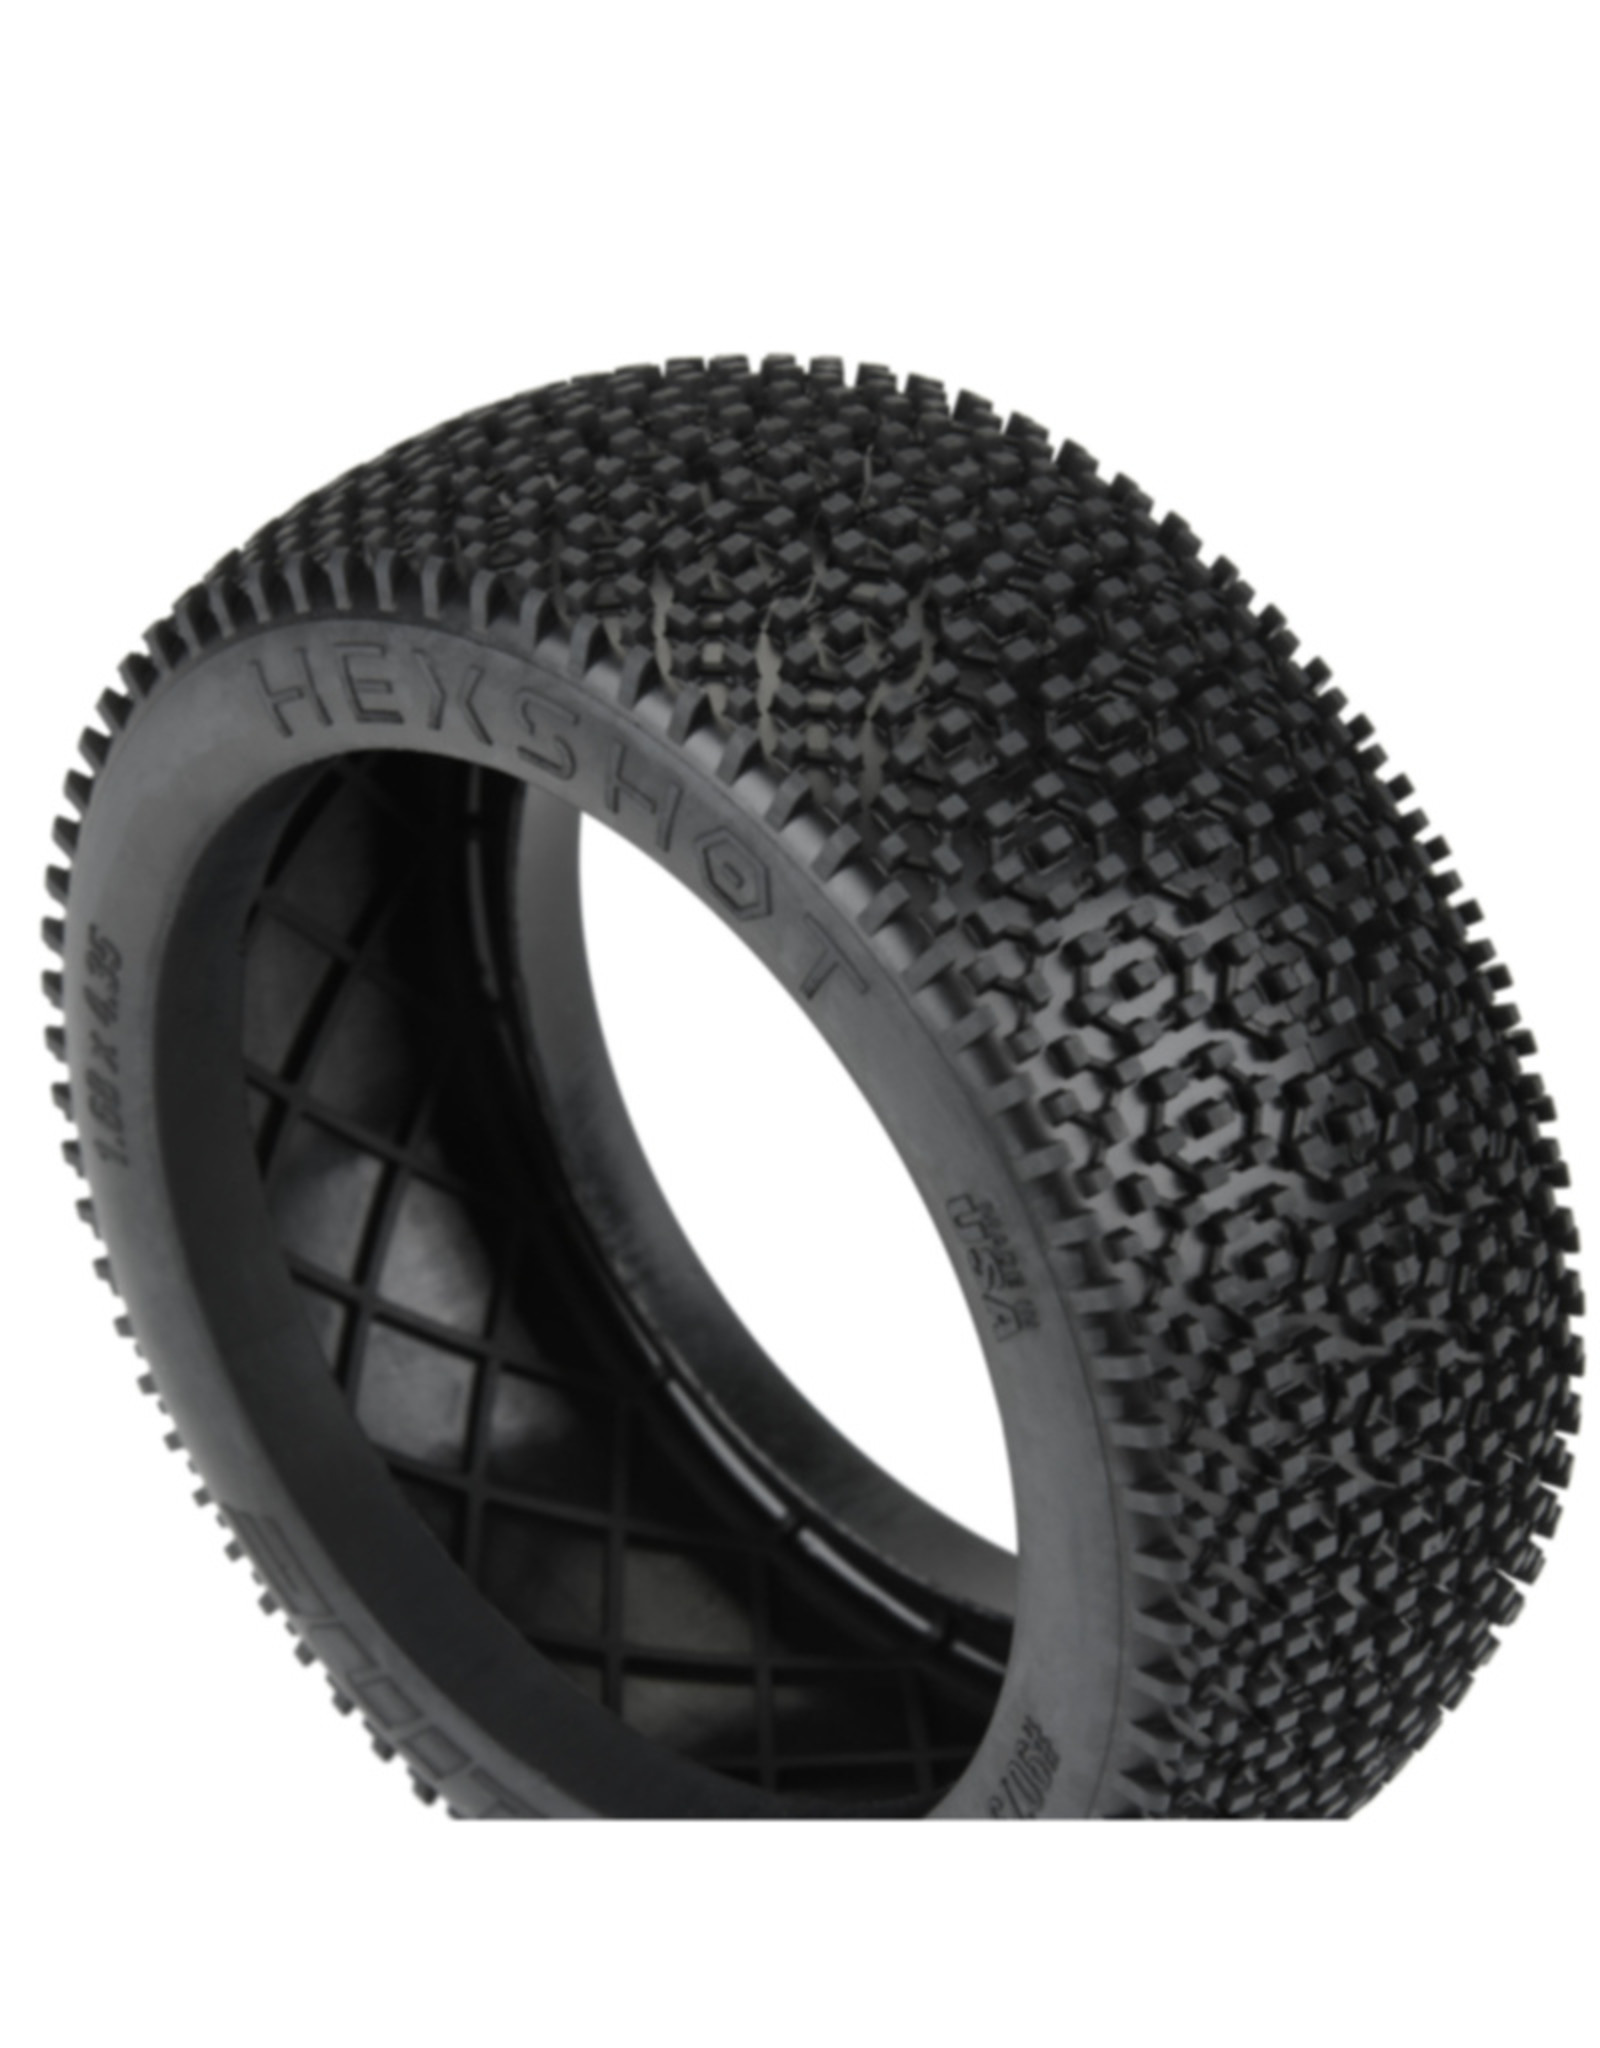 Pro-Line Racing PRO9073203 1/8 Hex Shot S3 Front/Rear Off-Road Buggy Tires (2)